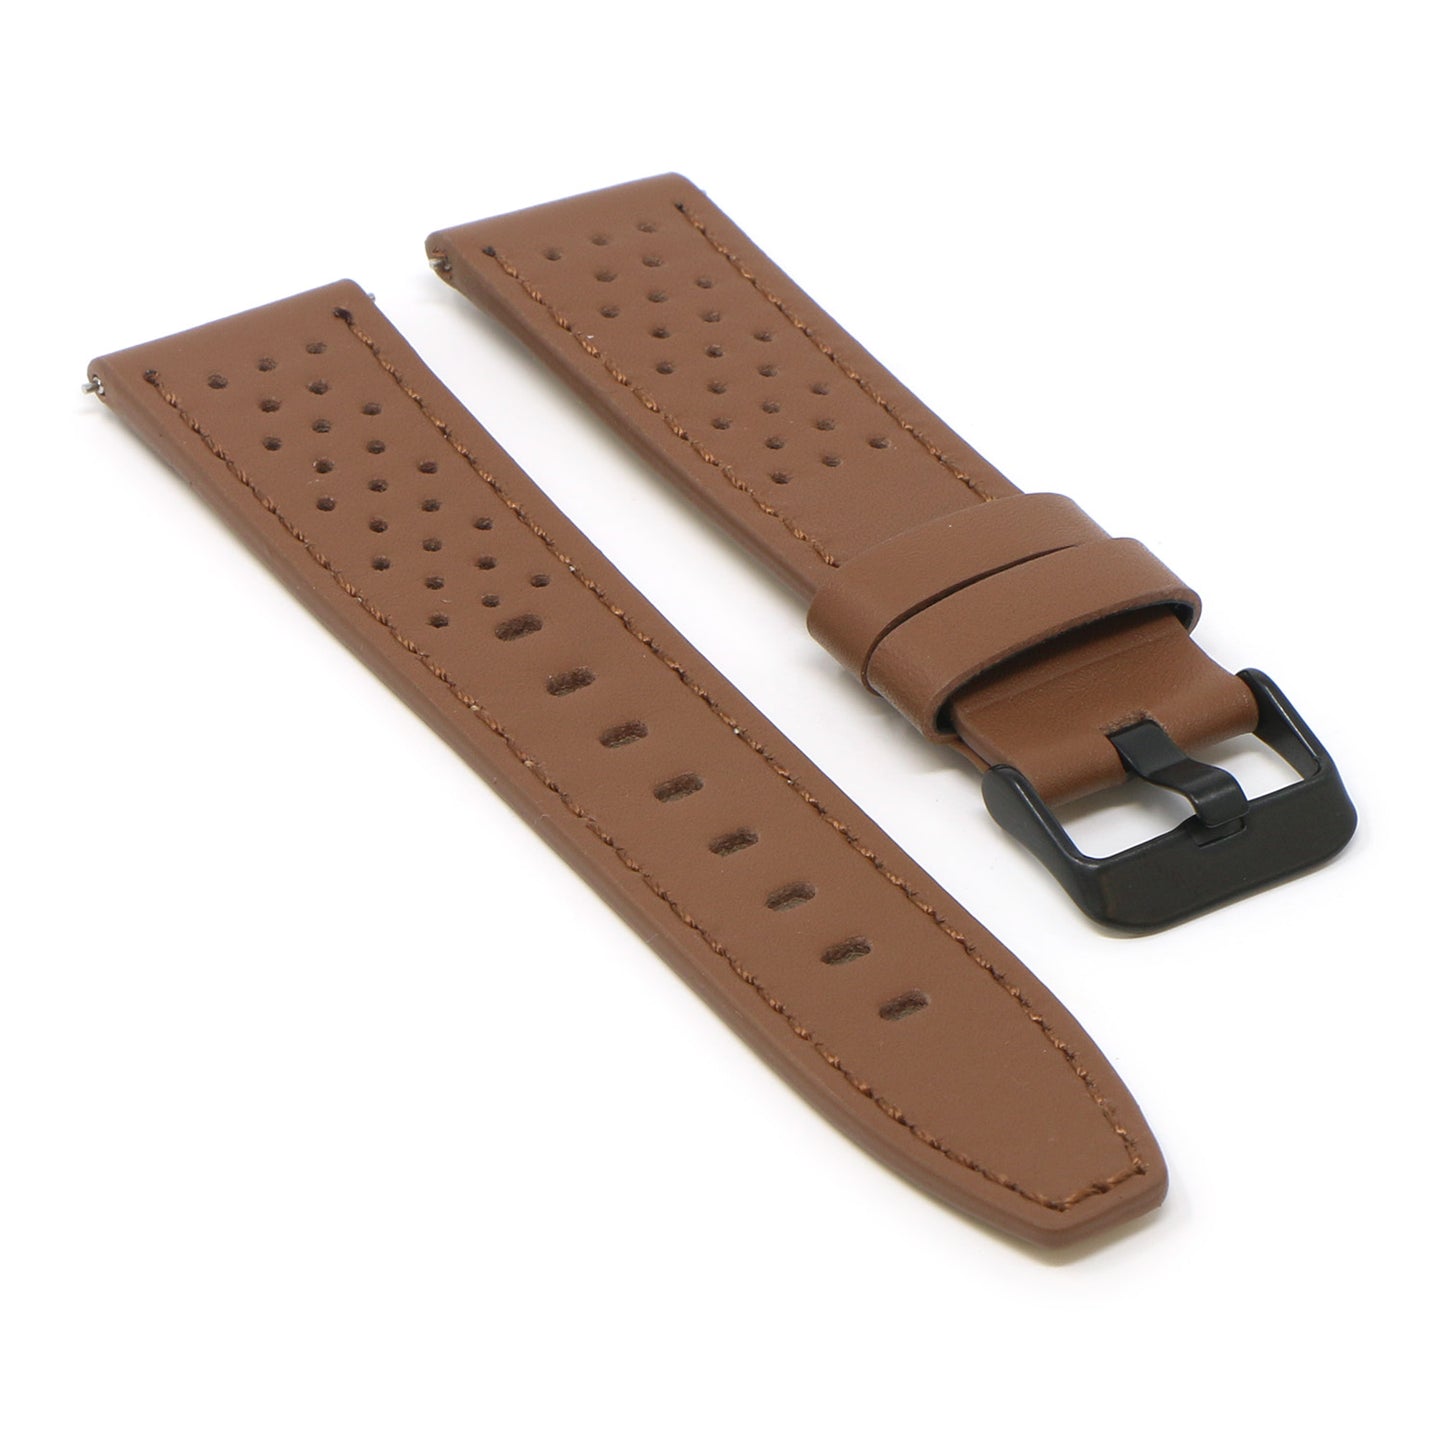 23mm Perforated Leather Rally Strap